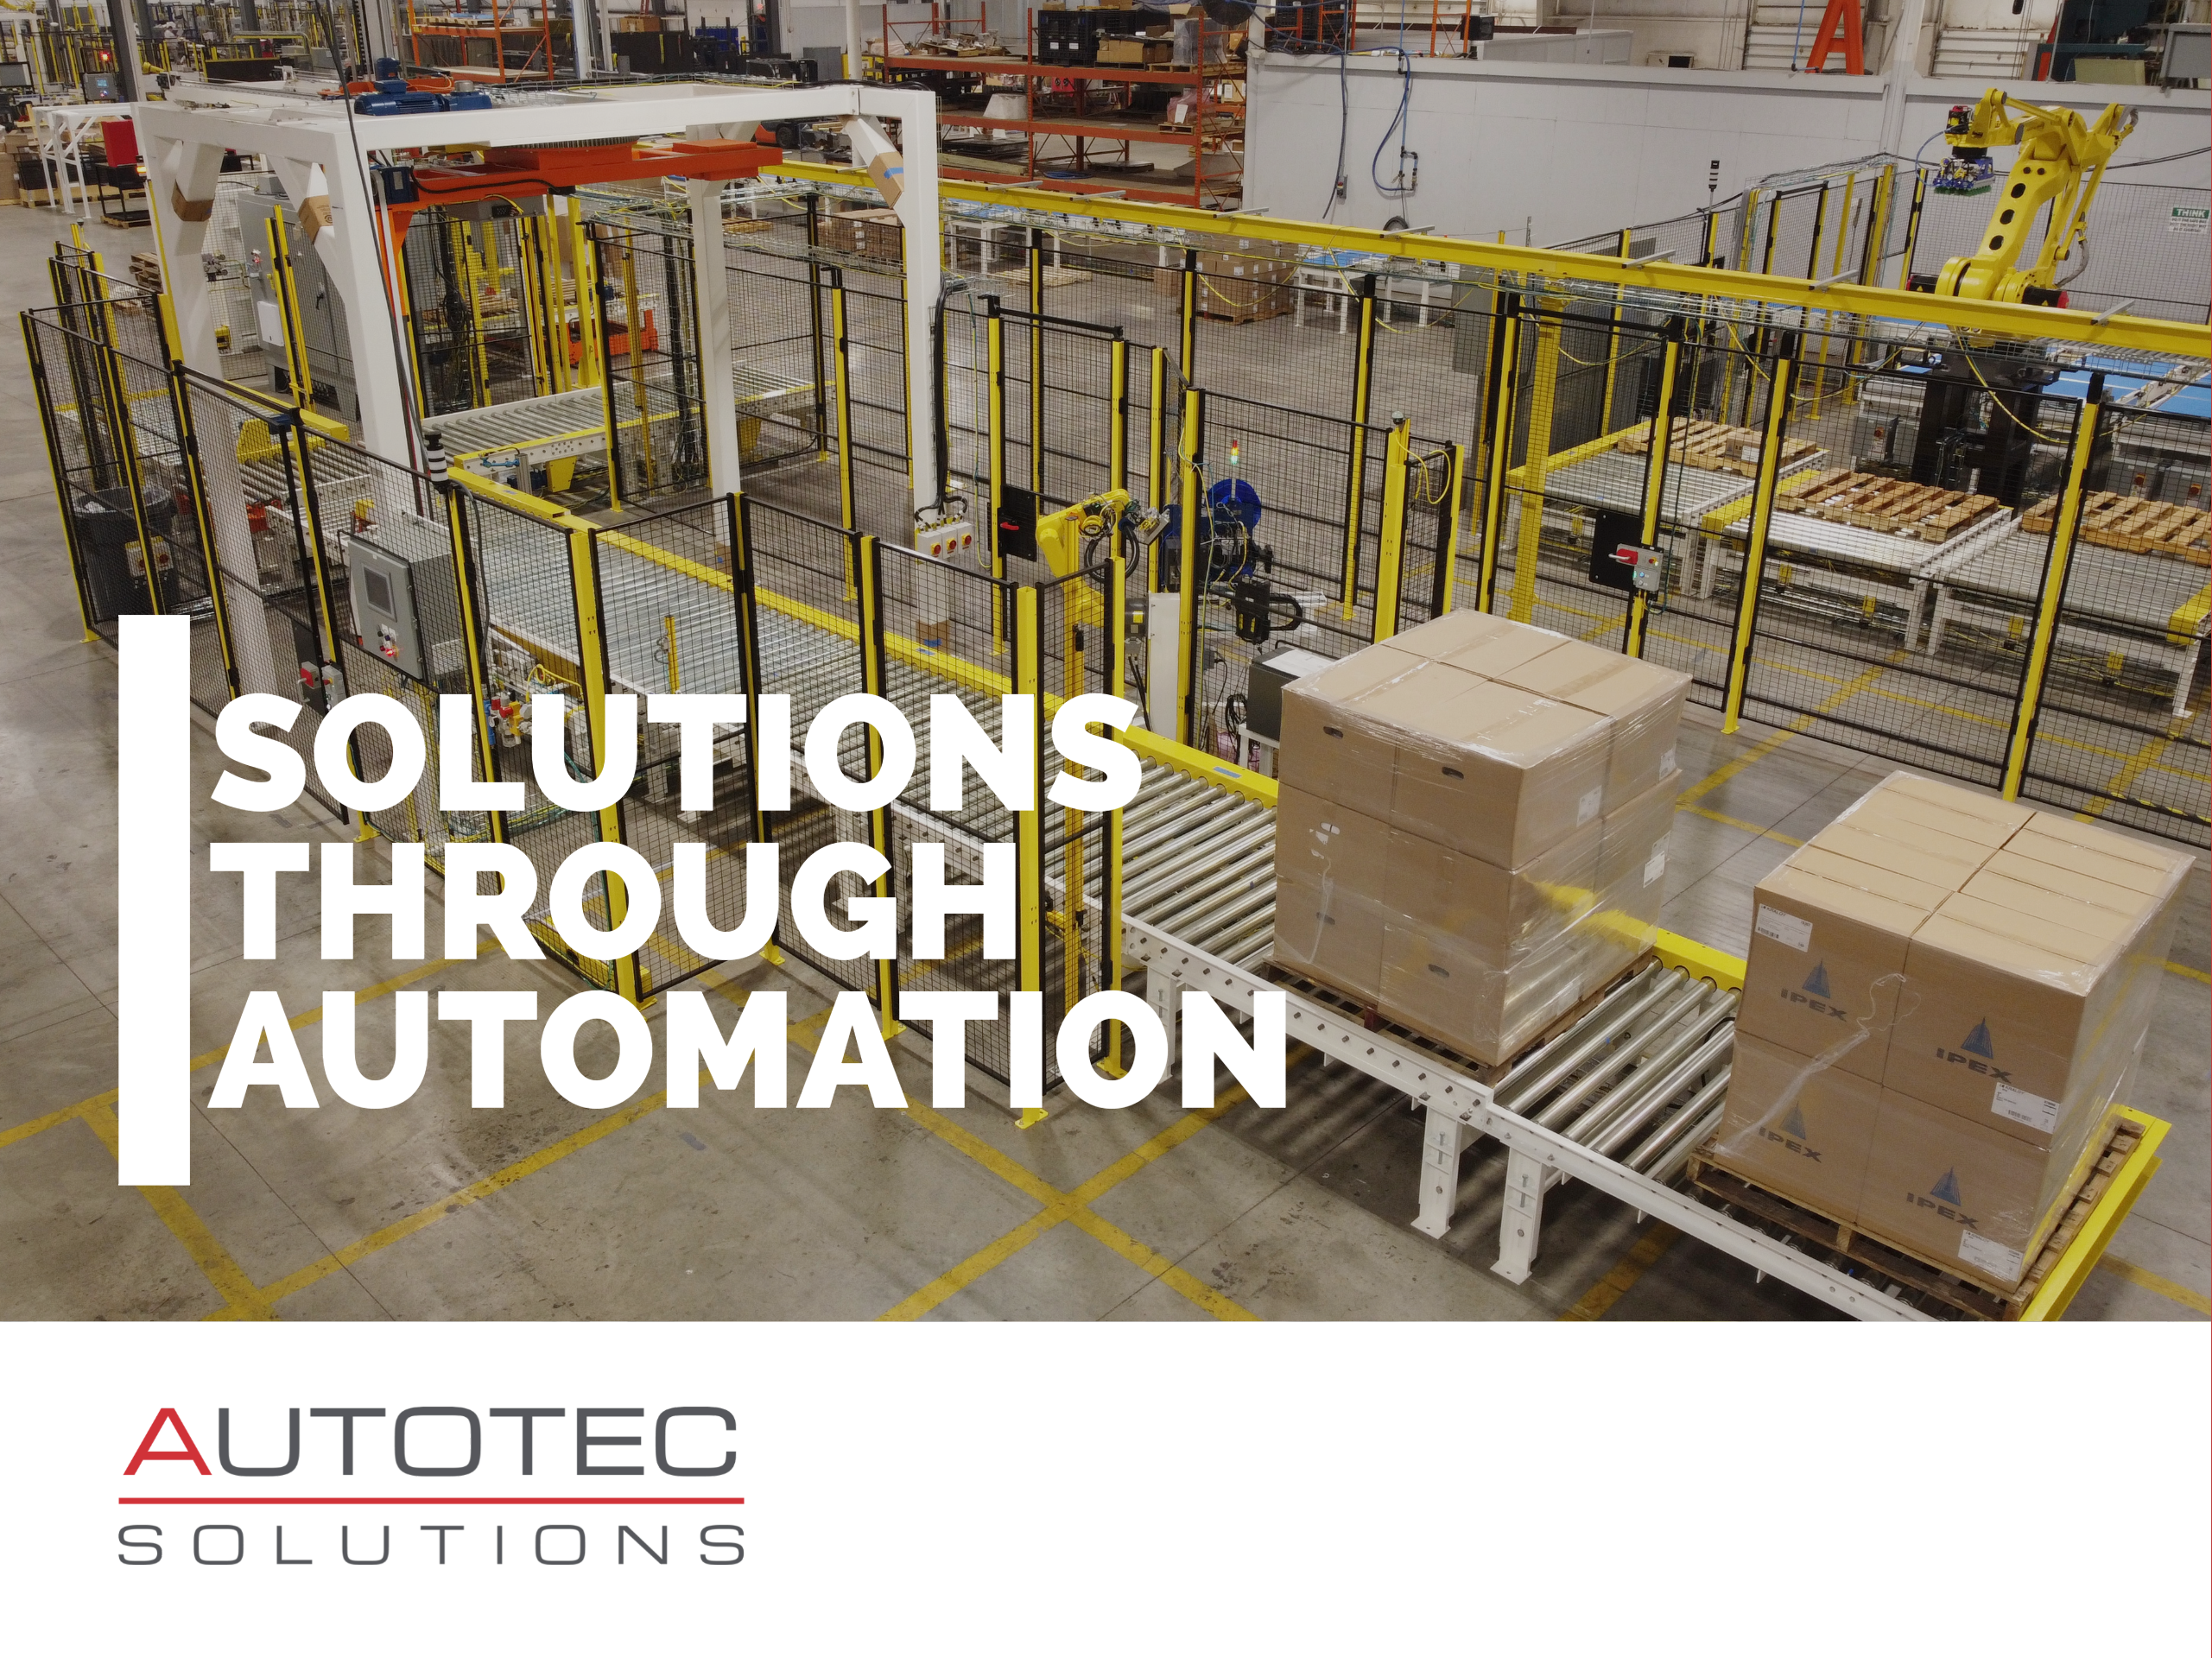 Solutions Through Automation- Automated Stretch Wrapper by Autotec Solutions We present our commitment to providing configurable and efficient automation systems for North American Manufacturers and their Supply Chains. This functionality-rich stretch wrapper line is capable of receiving full or partially full pallets from diverse sources, including: Transfer cart from Autotec palletizer Autonomous Mobile Robot (AMR) Electric pallet jack ramp (EPJ) Traditional forklift drop-off point Experience efficiency, flexibility, and innovation are all integrated into one system. Elevate your operations with Autotec Solutions.